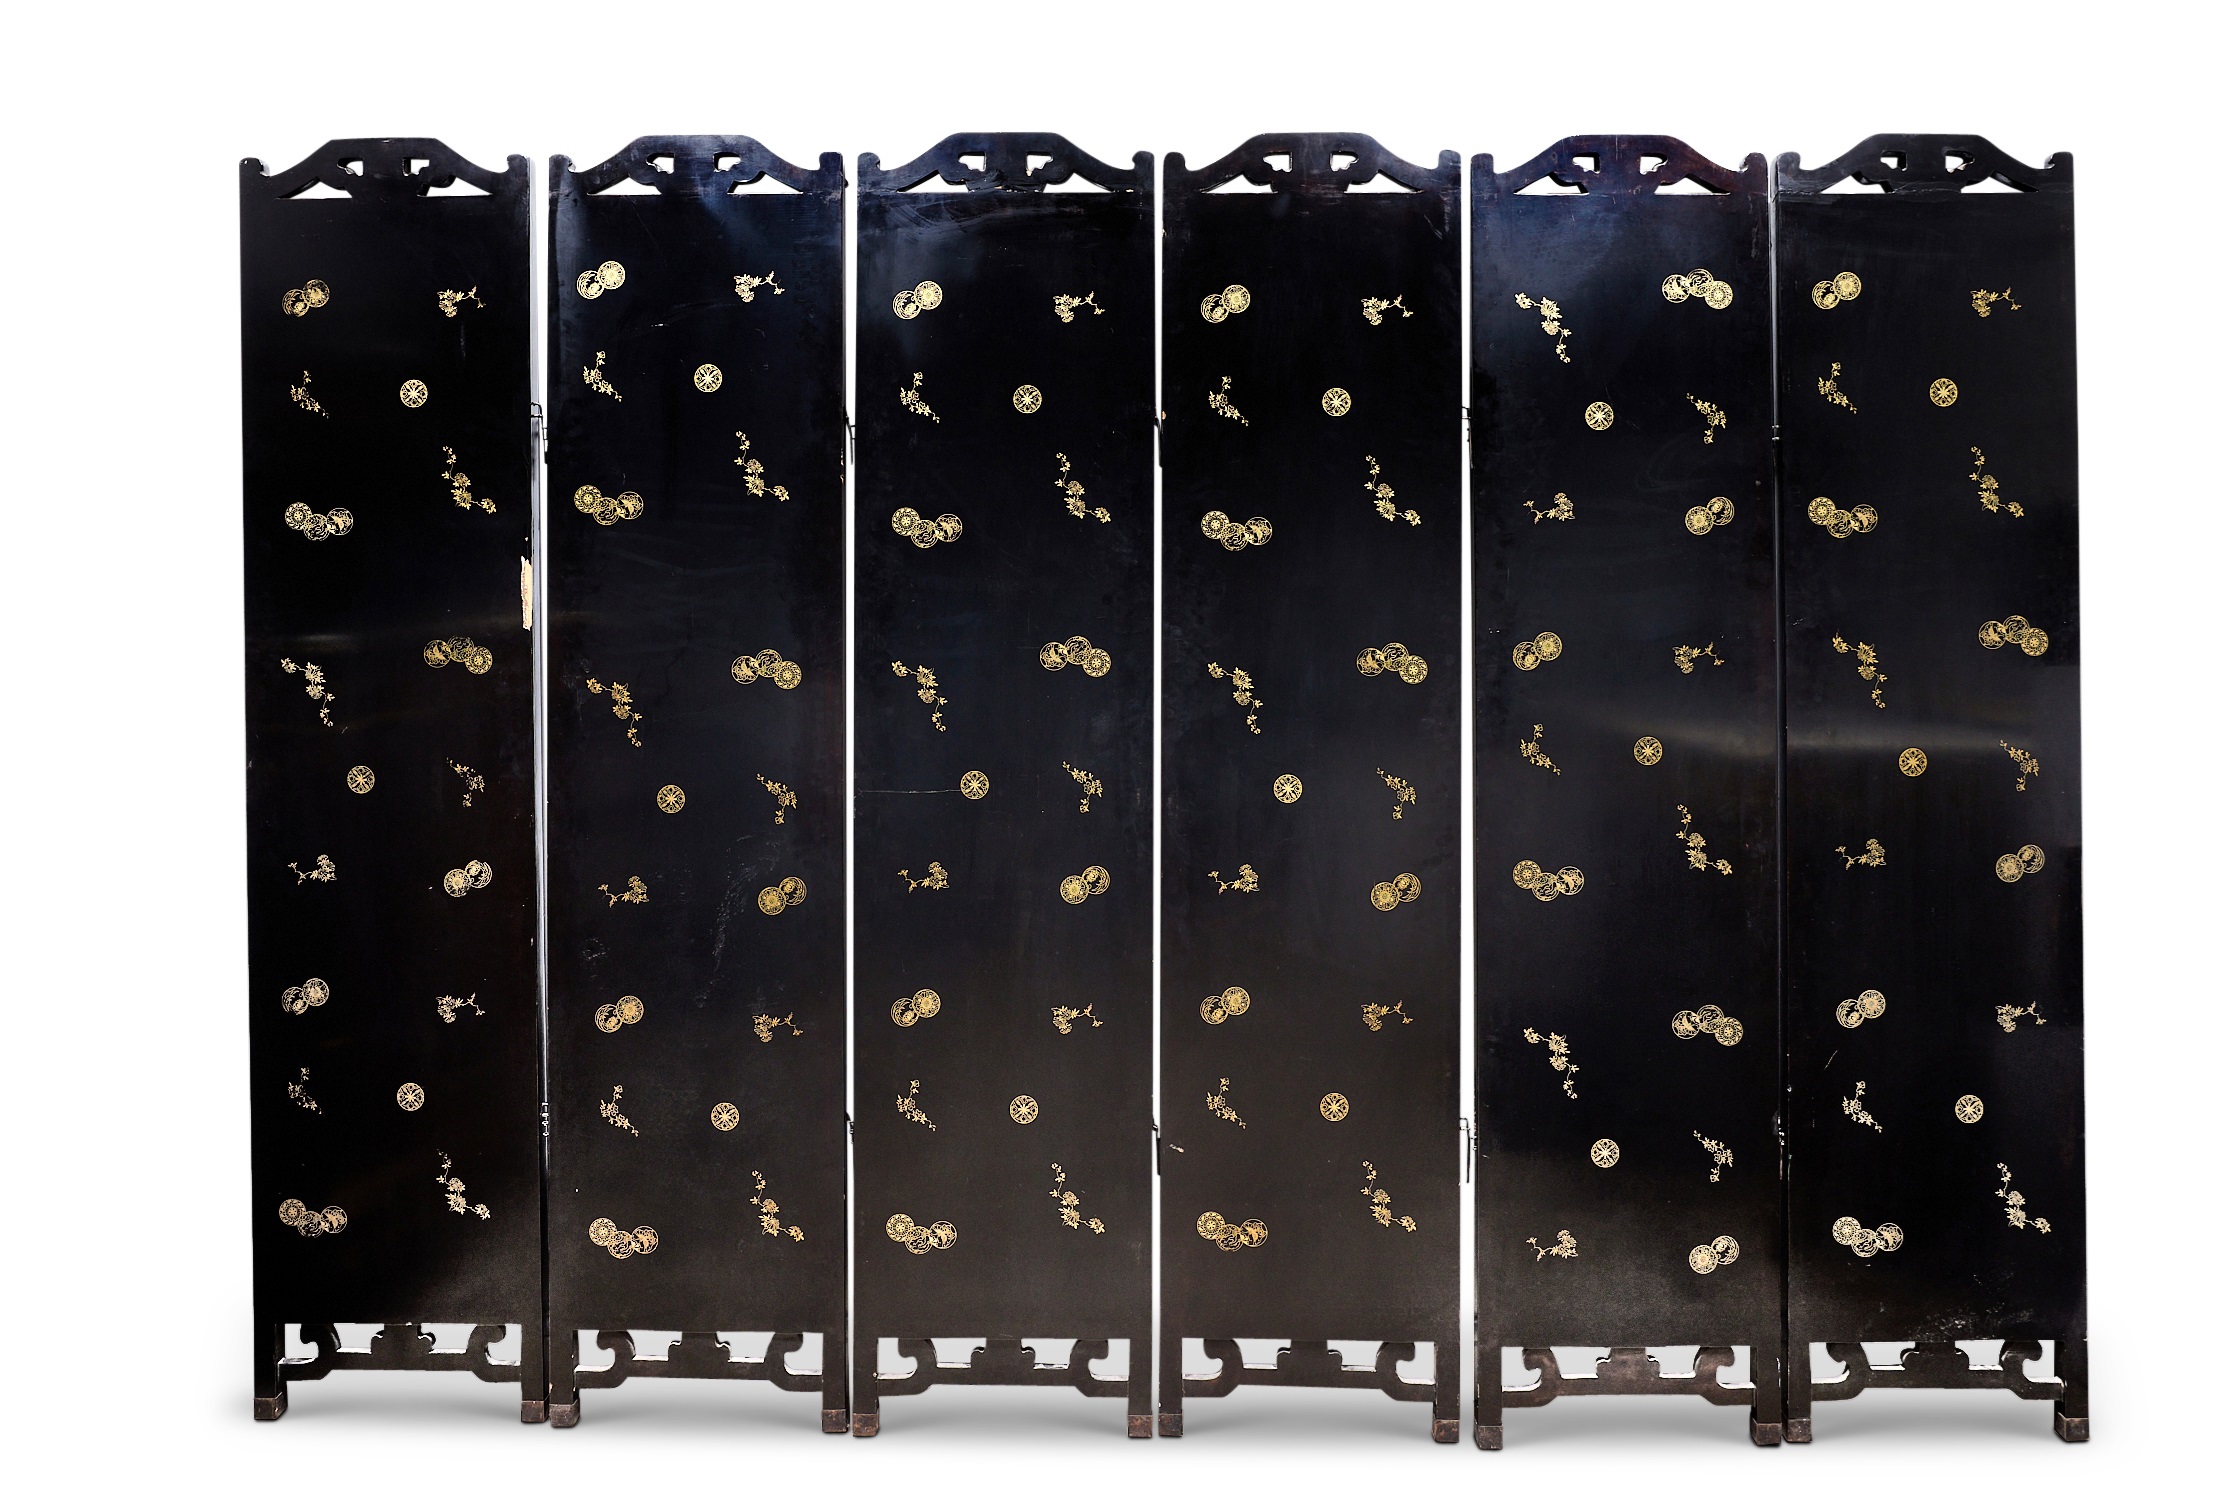 AN EARLY 20TH CENTURY CHINESE CLOISONNE ENAMEL AND BLACK LACQUERED SIX PANEL SCREEN - Image 2 of 2